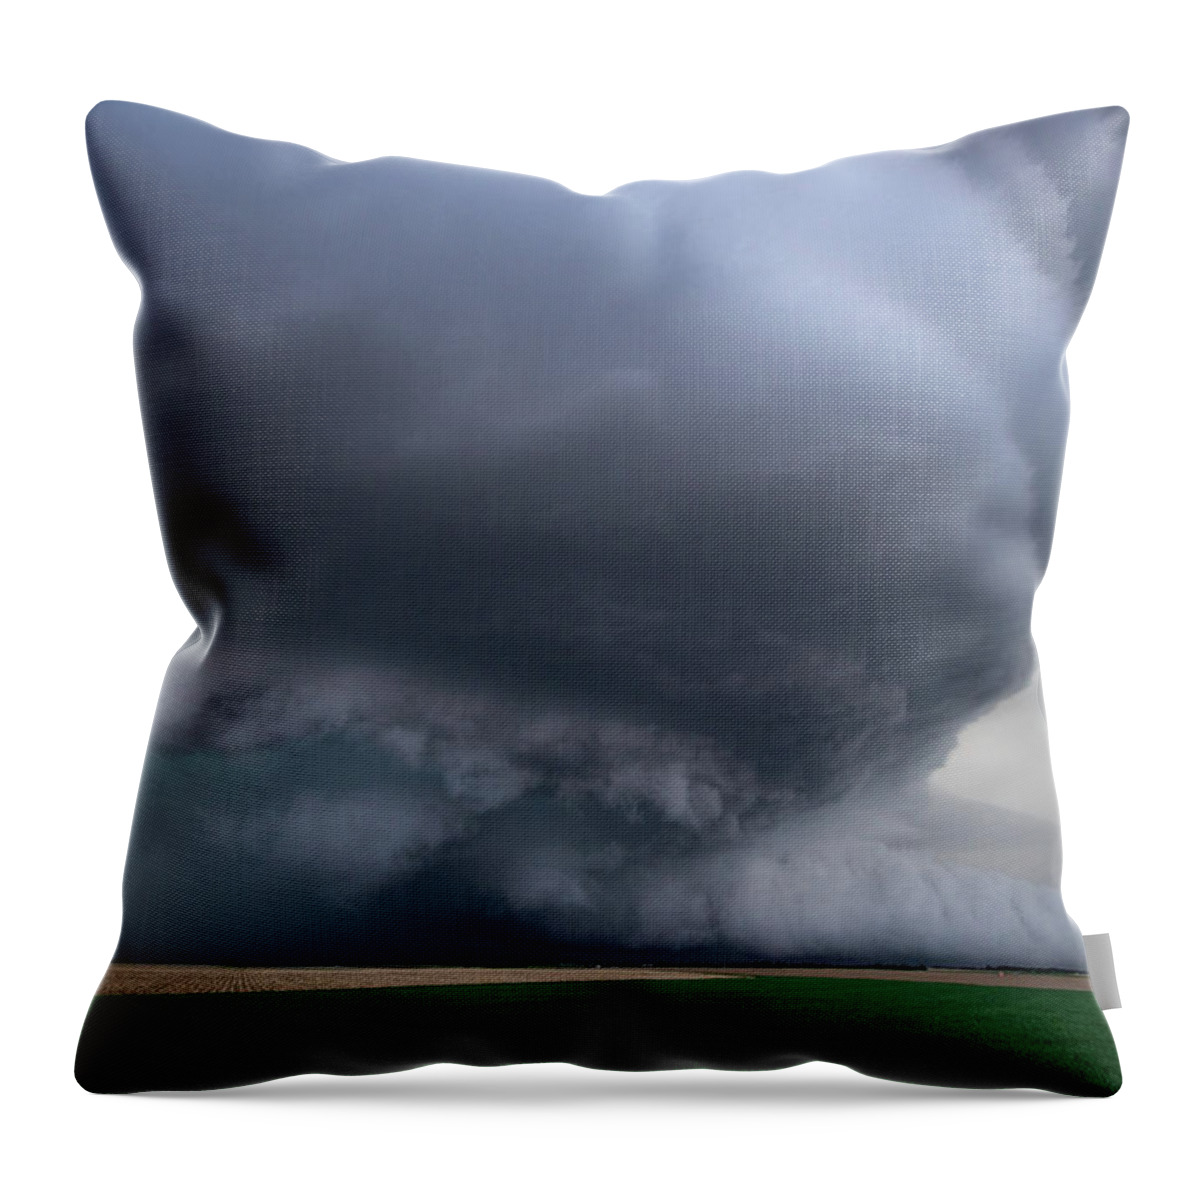 Mesocyclone Throw Pillow featuring the photograph Mesocyclone by Wesley Aston